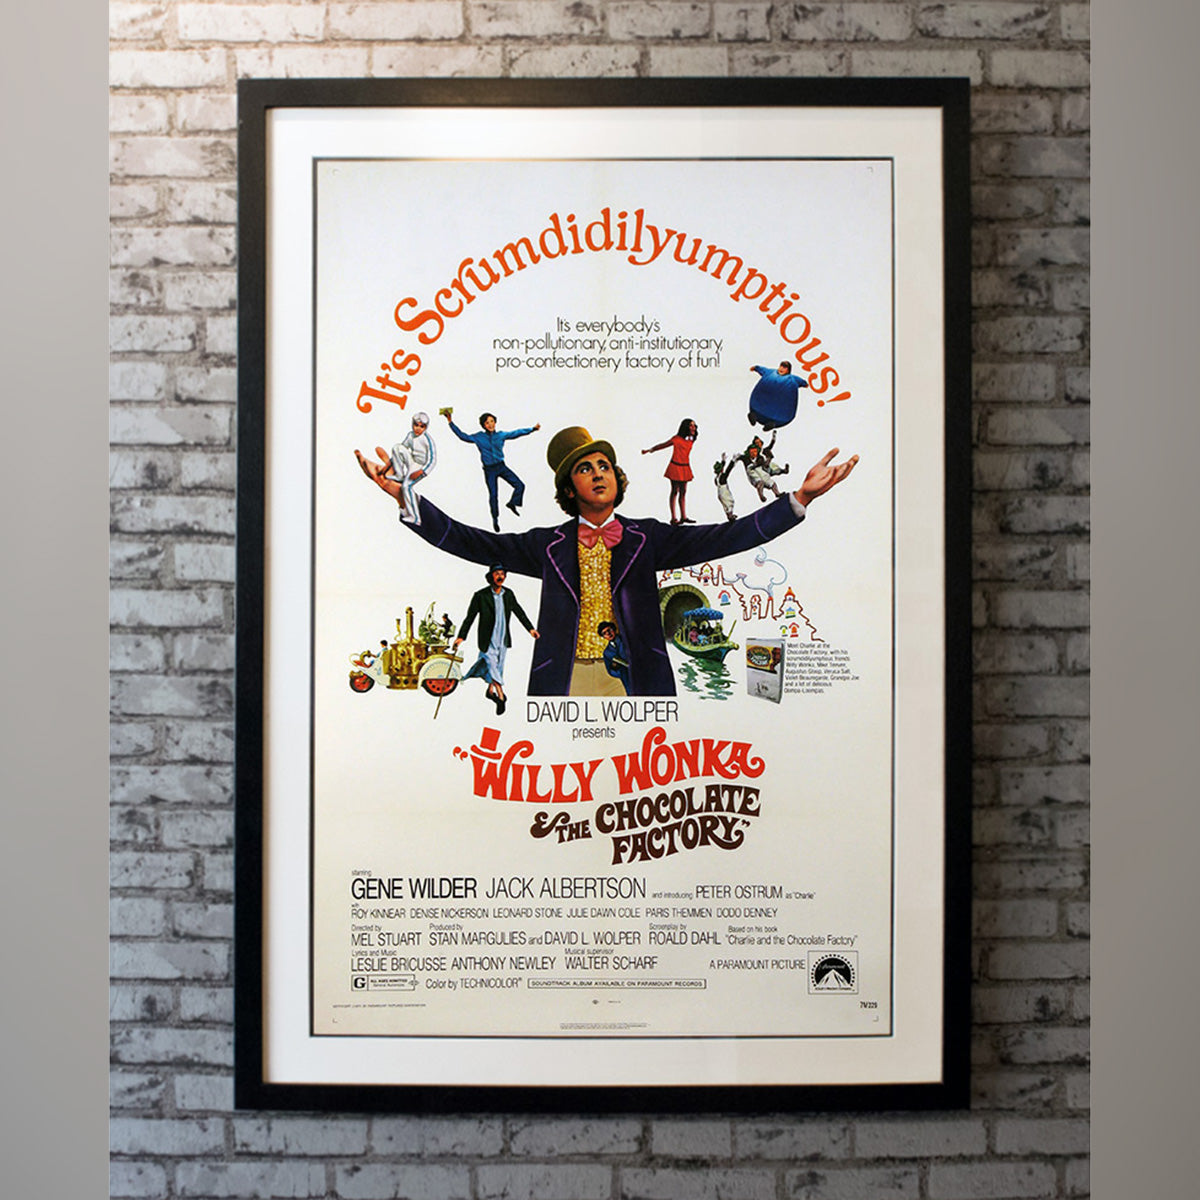 Original Movie Poster of Willy Wonka & The Chocolate Factory (1971)